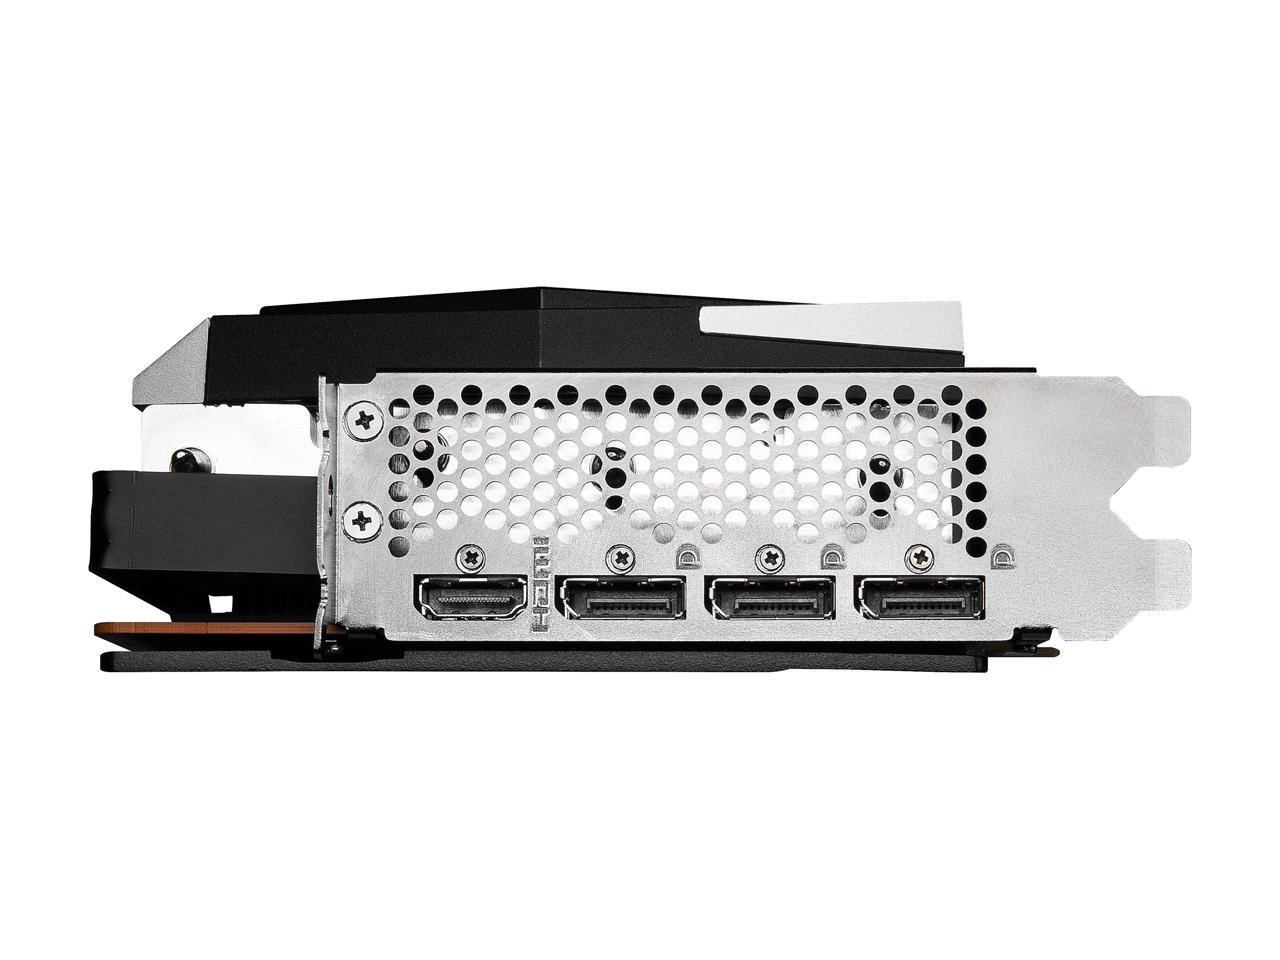 MSI Radeon RX 6800 GAMING TRIO 16G Left Side View